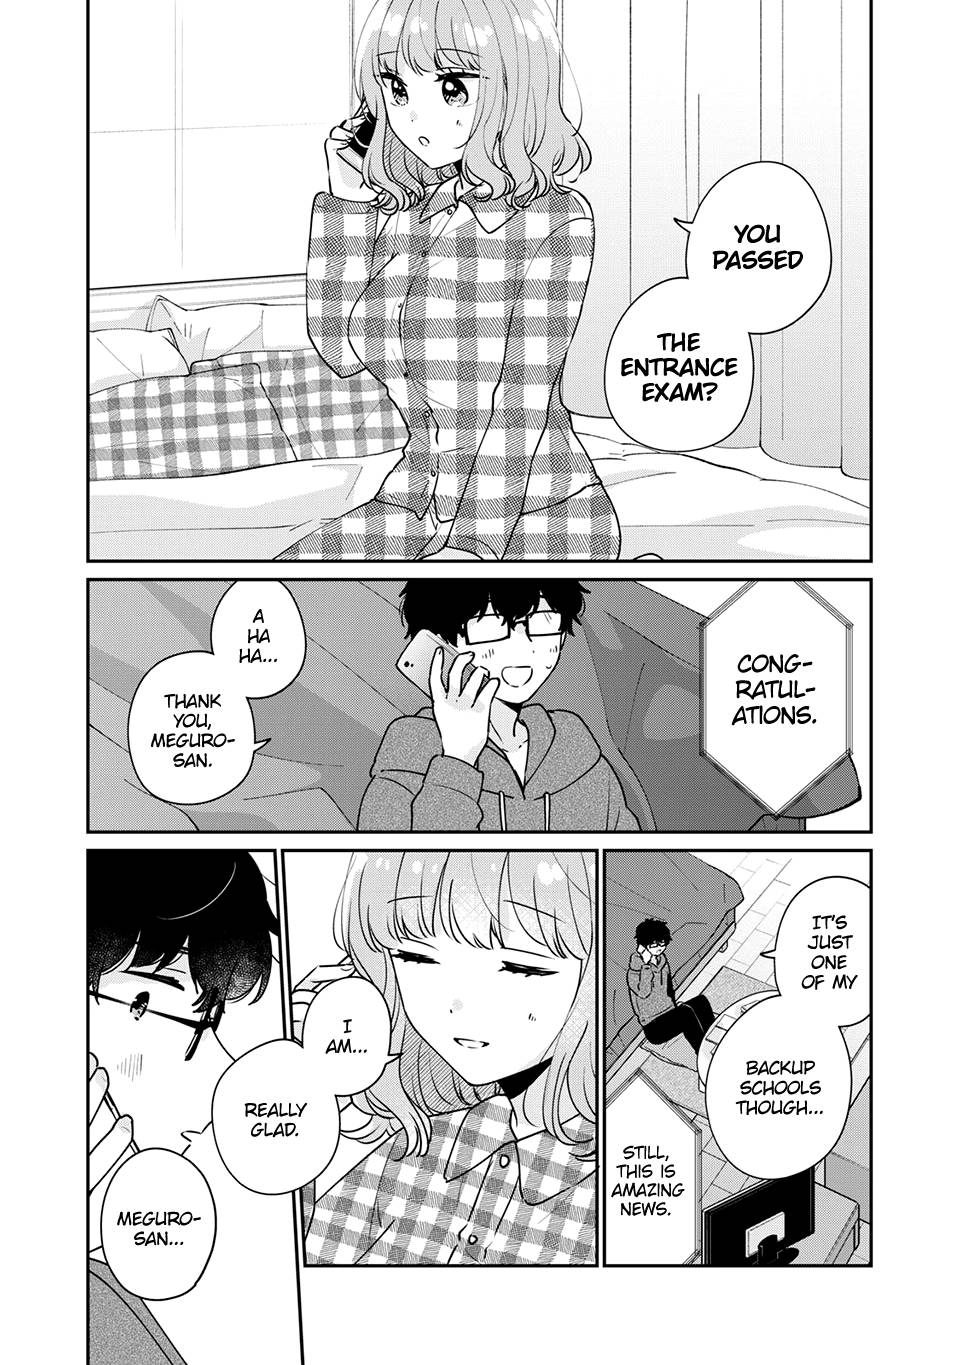 It's Not Meguro-san's First Time chapter 43 page 2